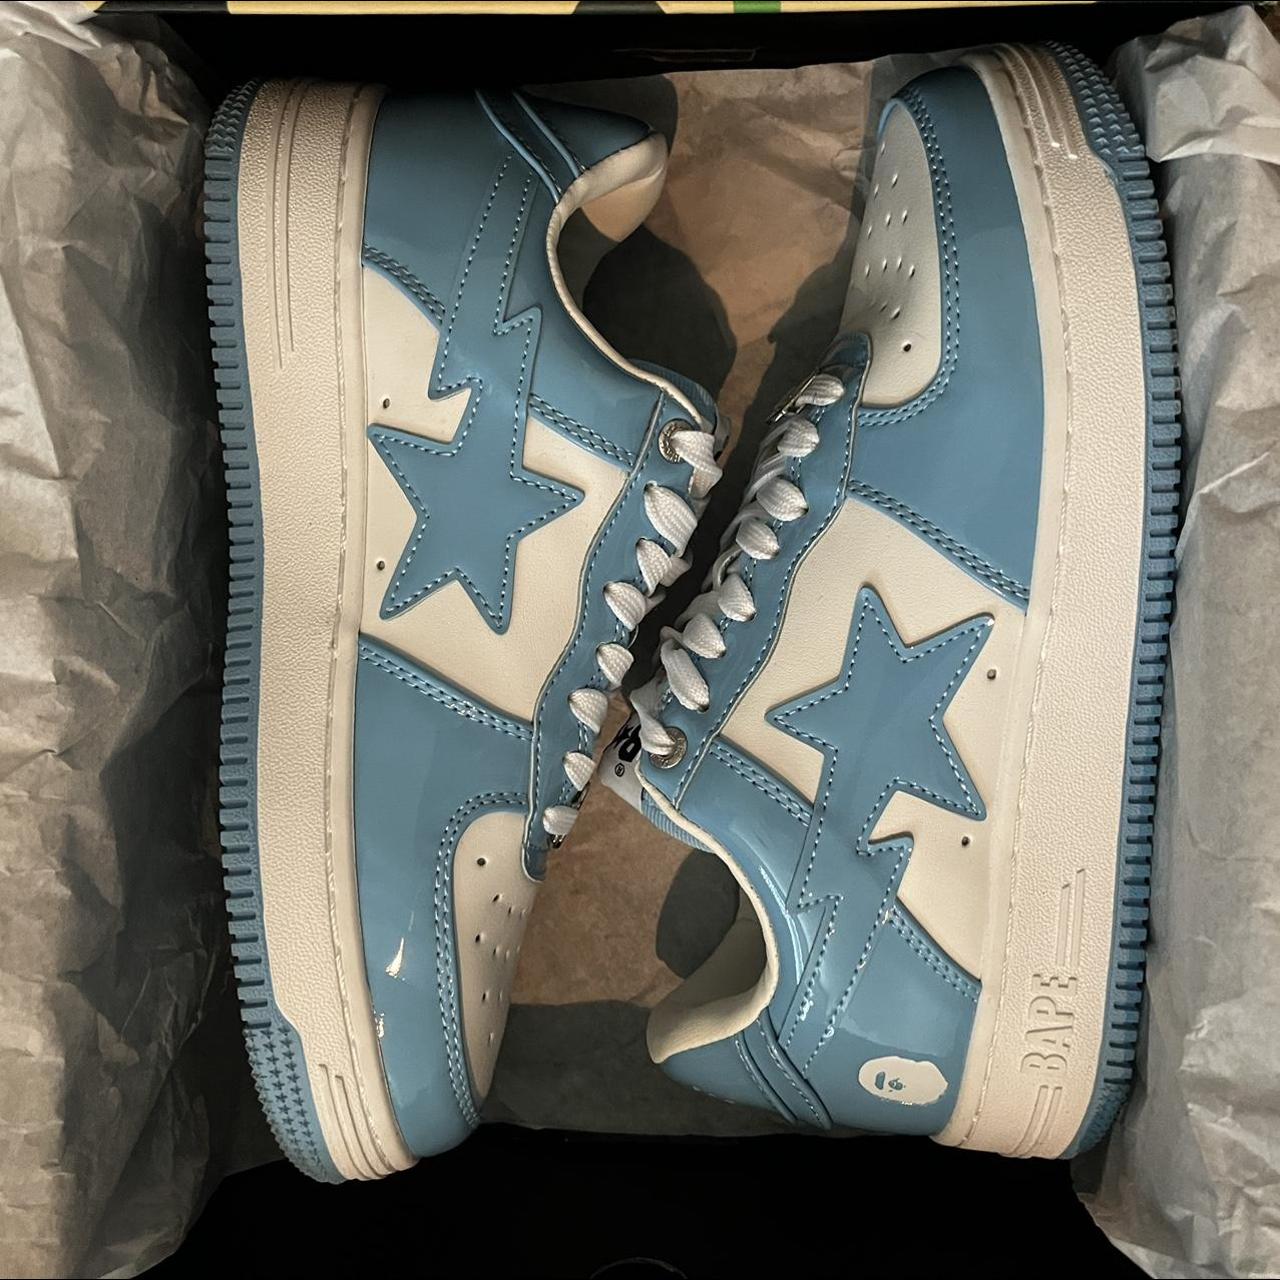 Used Unc Blue Bapesta REPS with authentic box - Depop